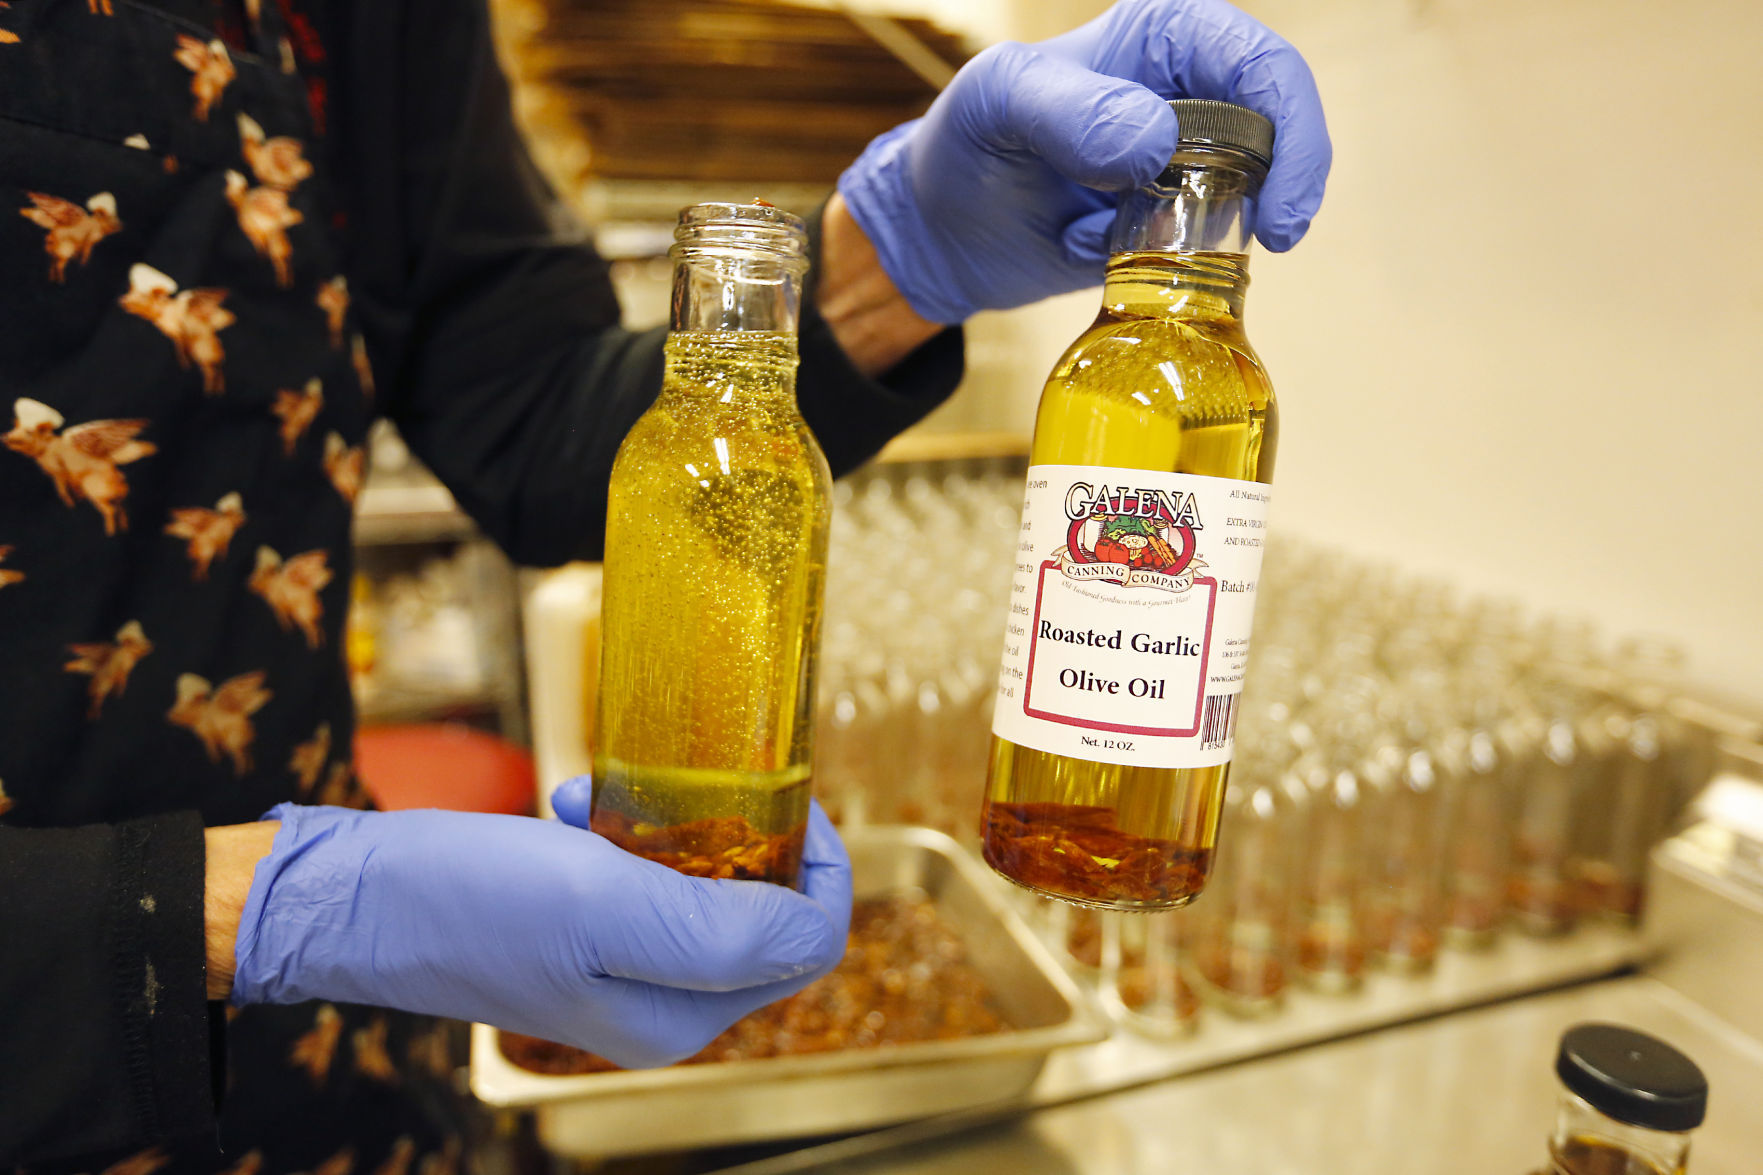 Chef Ivo Puidak shows his roasted garlic olive oil at Galena Canning Company in Galena, Ill.    PHOTO CREDIT: EILEEN MESLAR